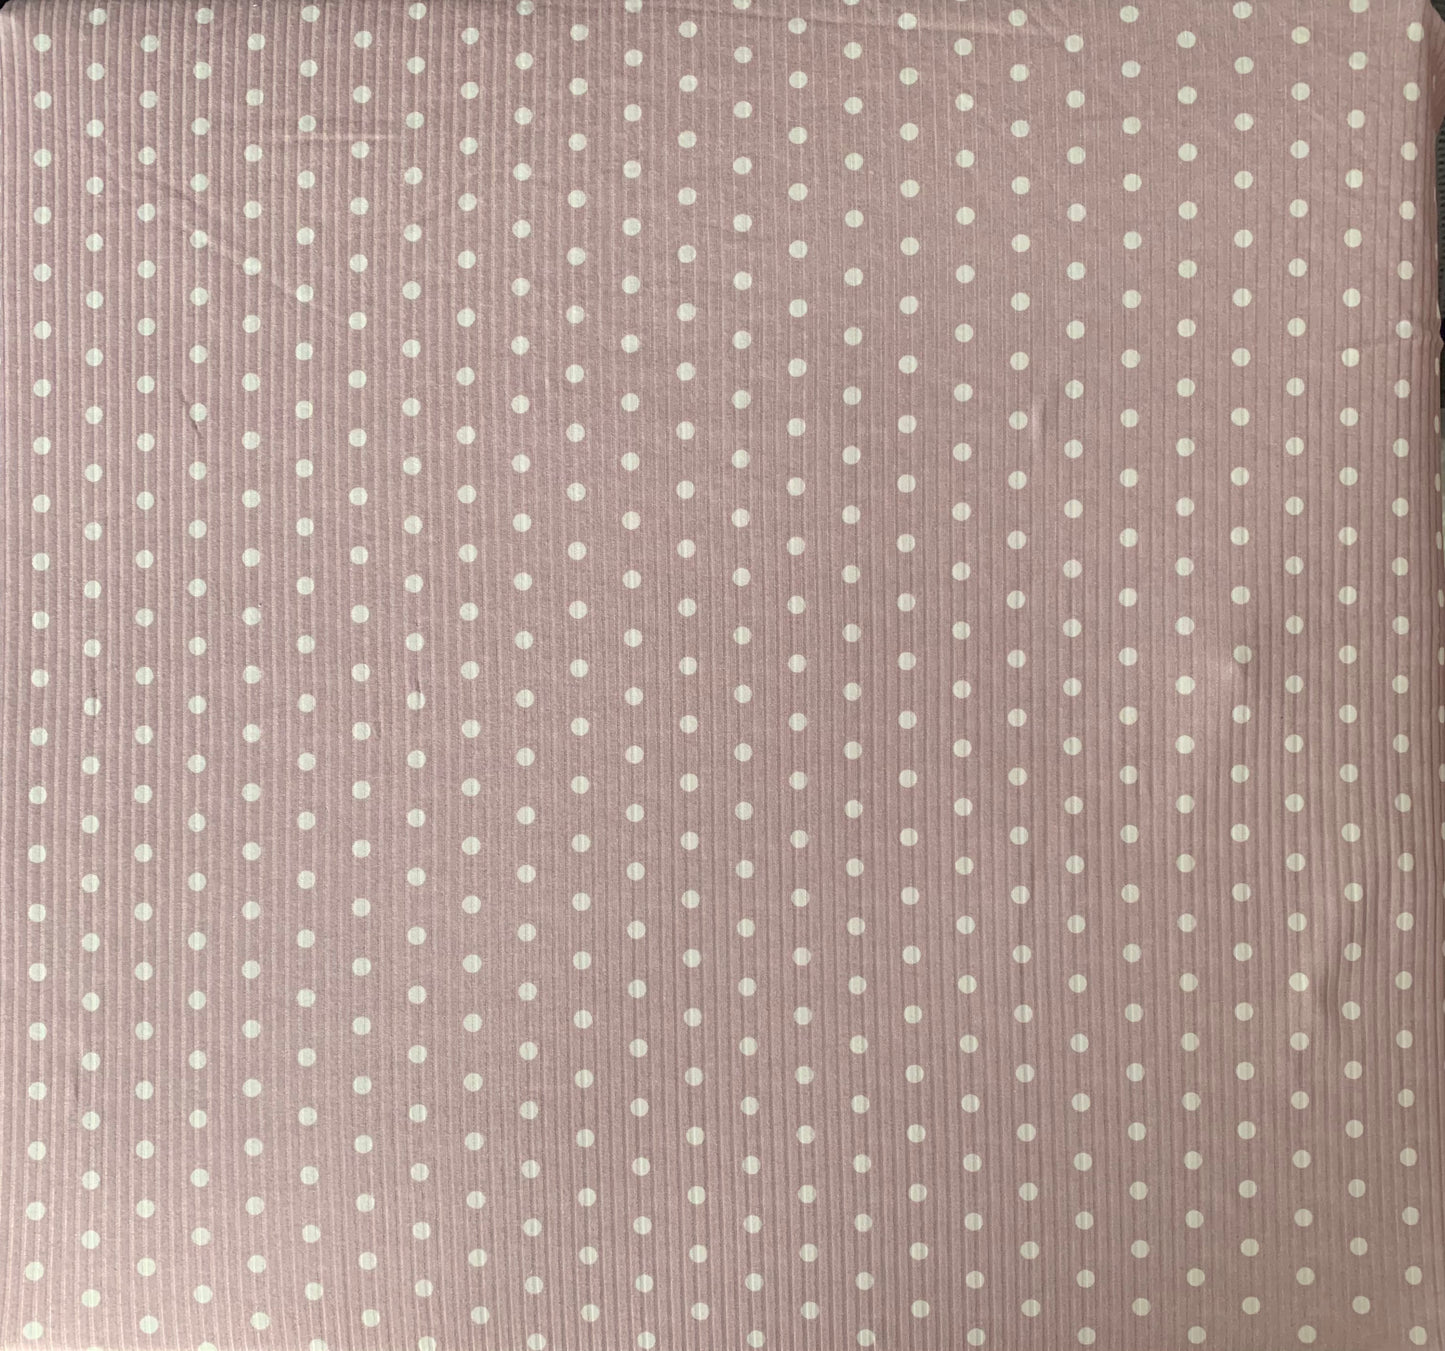 Polka Dot in Lilac on Brushed Rib Knit Fabric Sold by the 1/4 yard